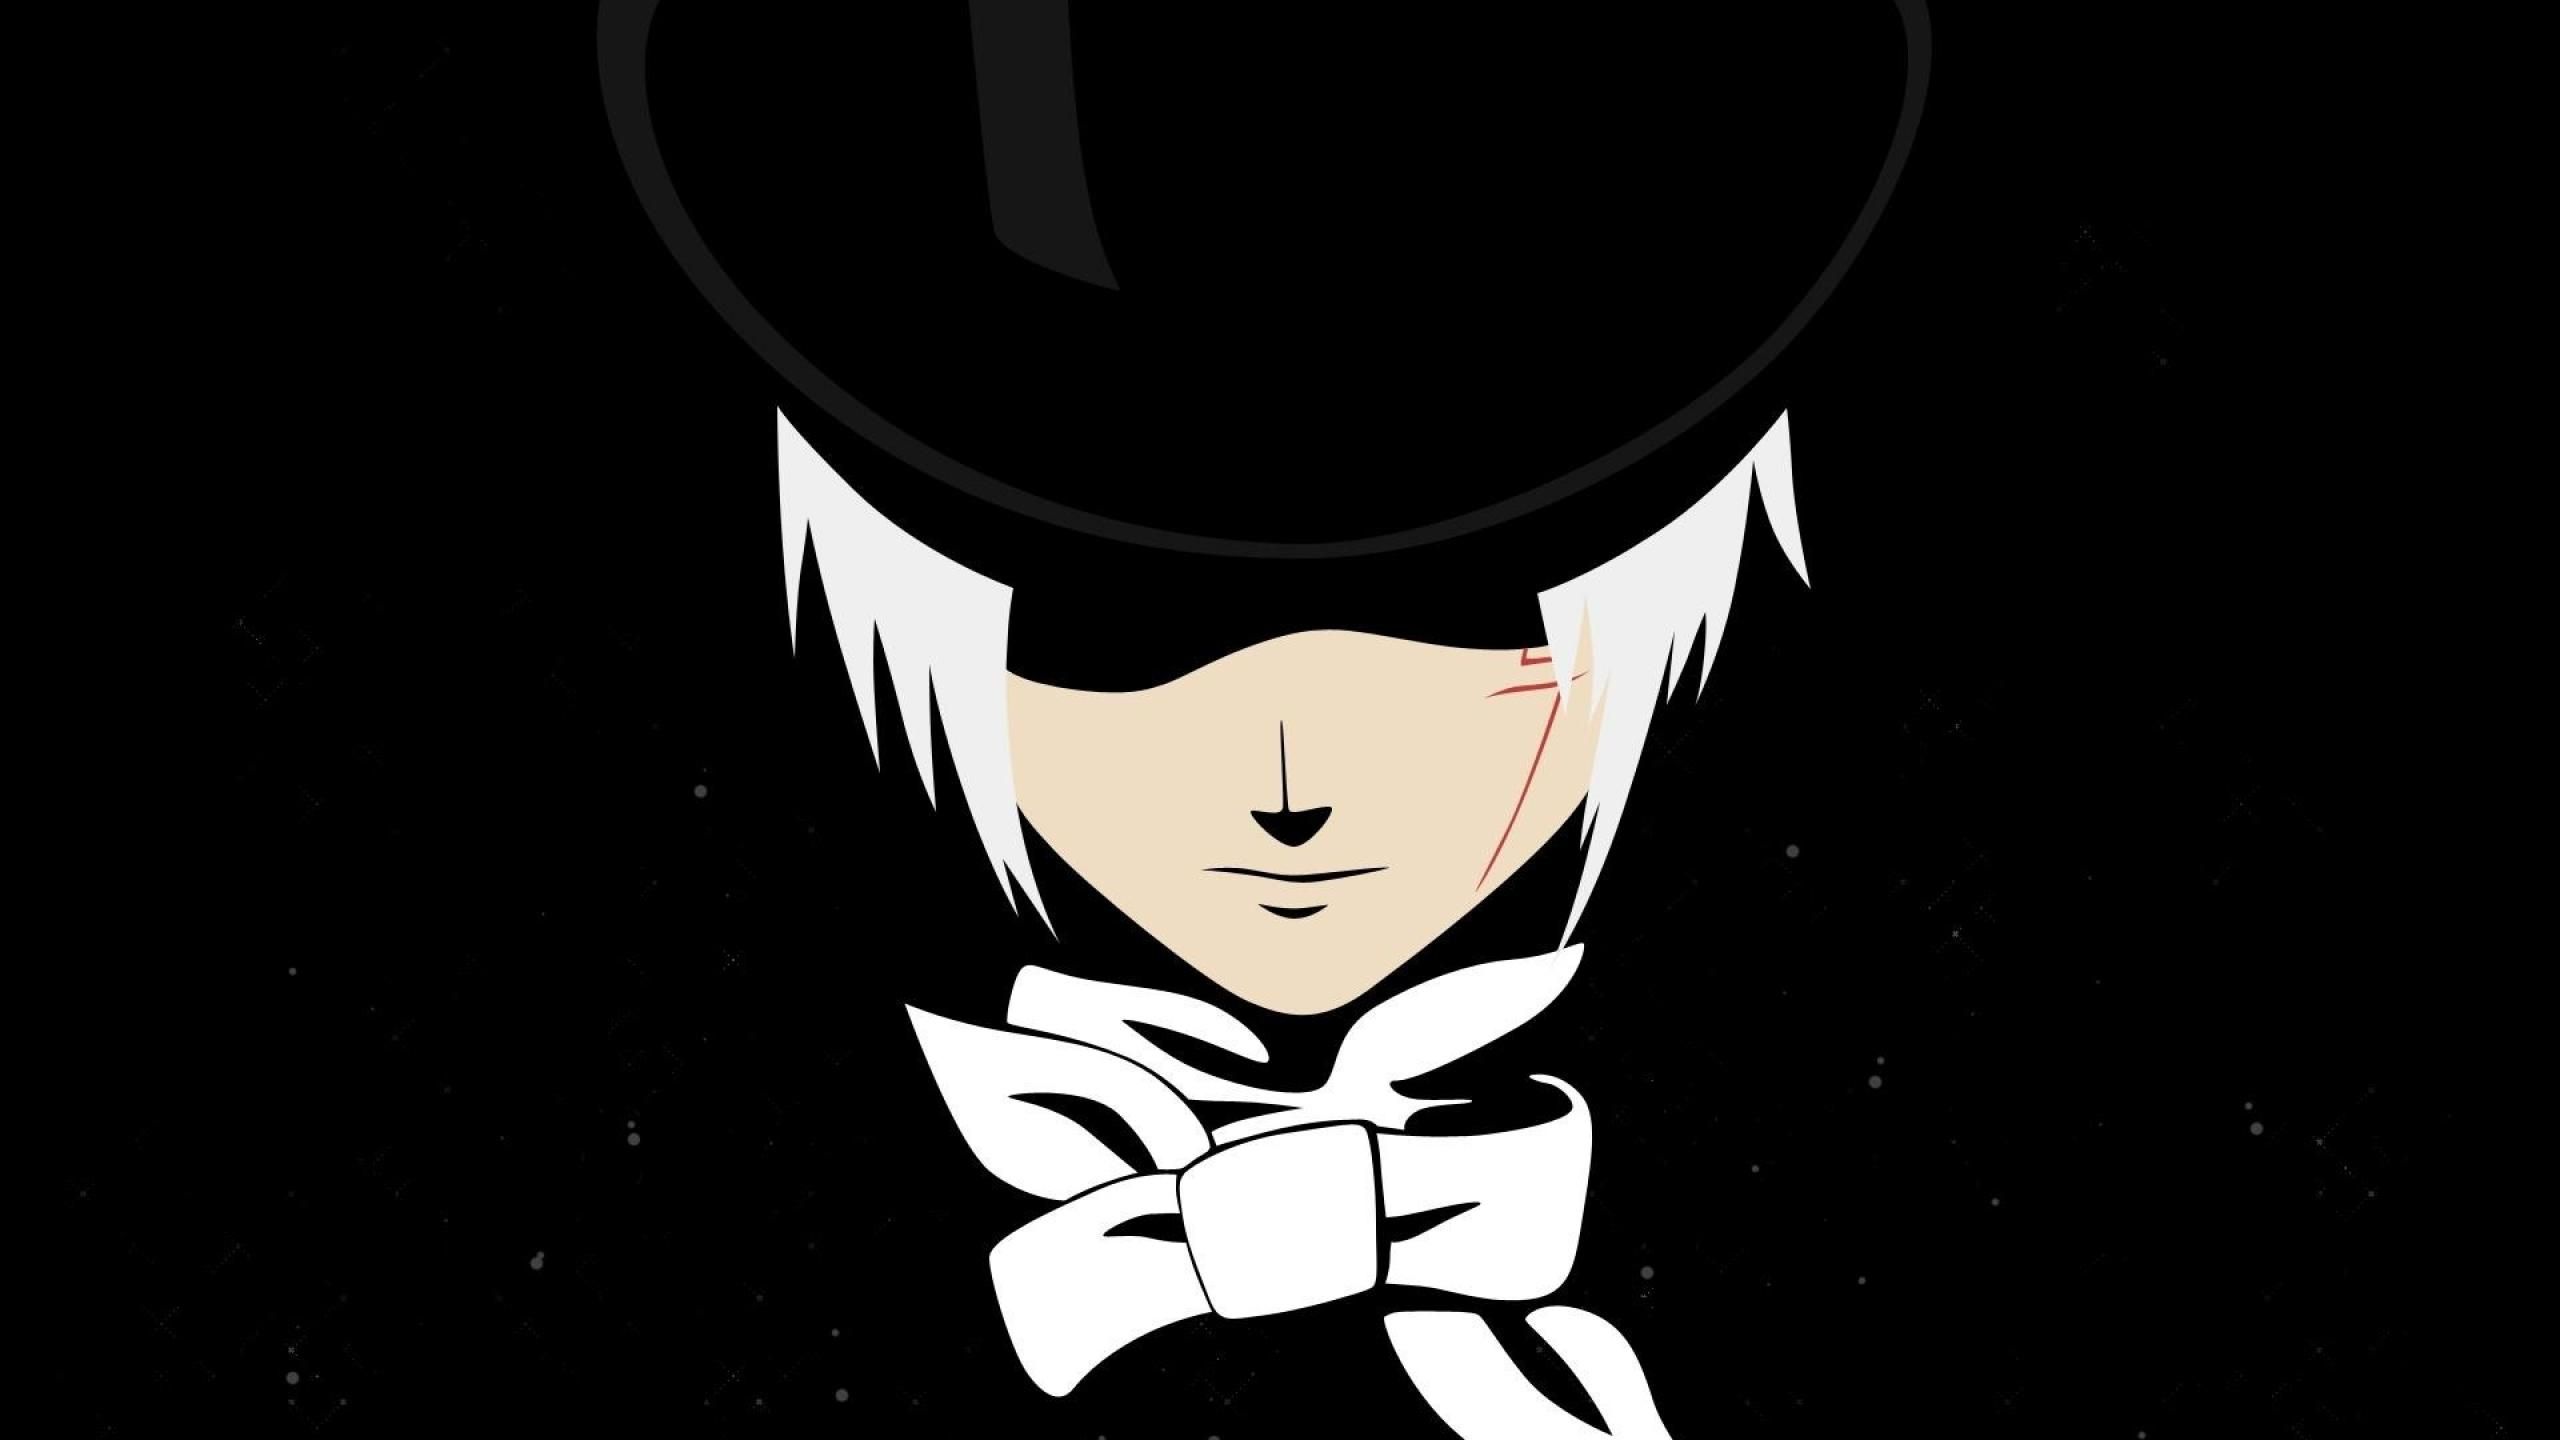 Wallpapers Vector Black And White Windows Anime Man Hi 2560x1440